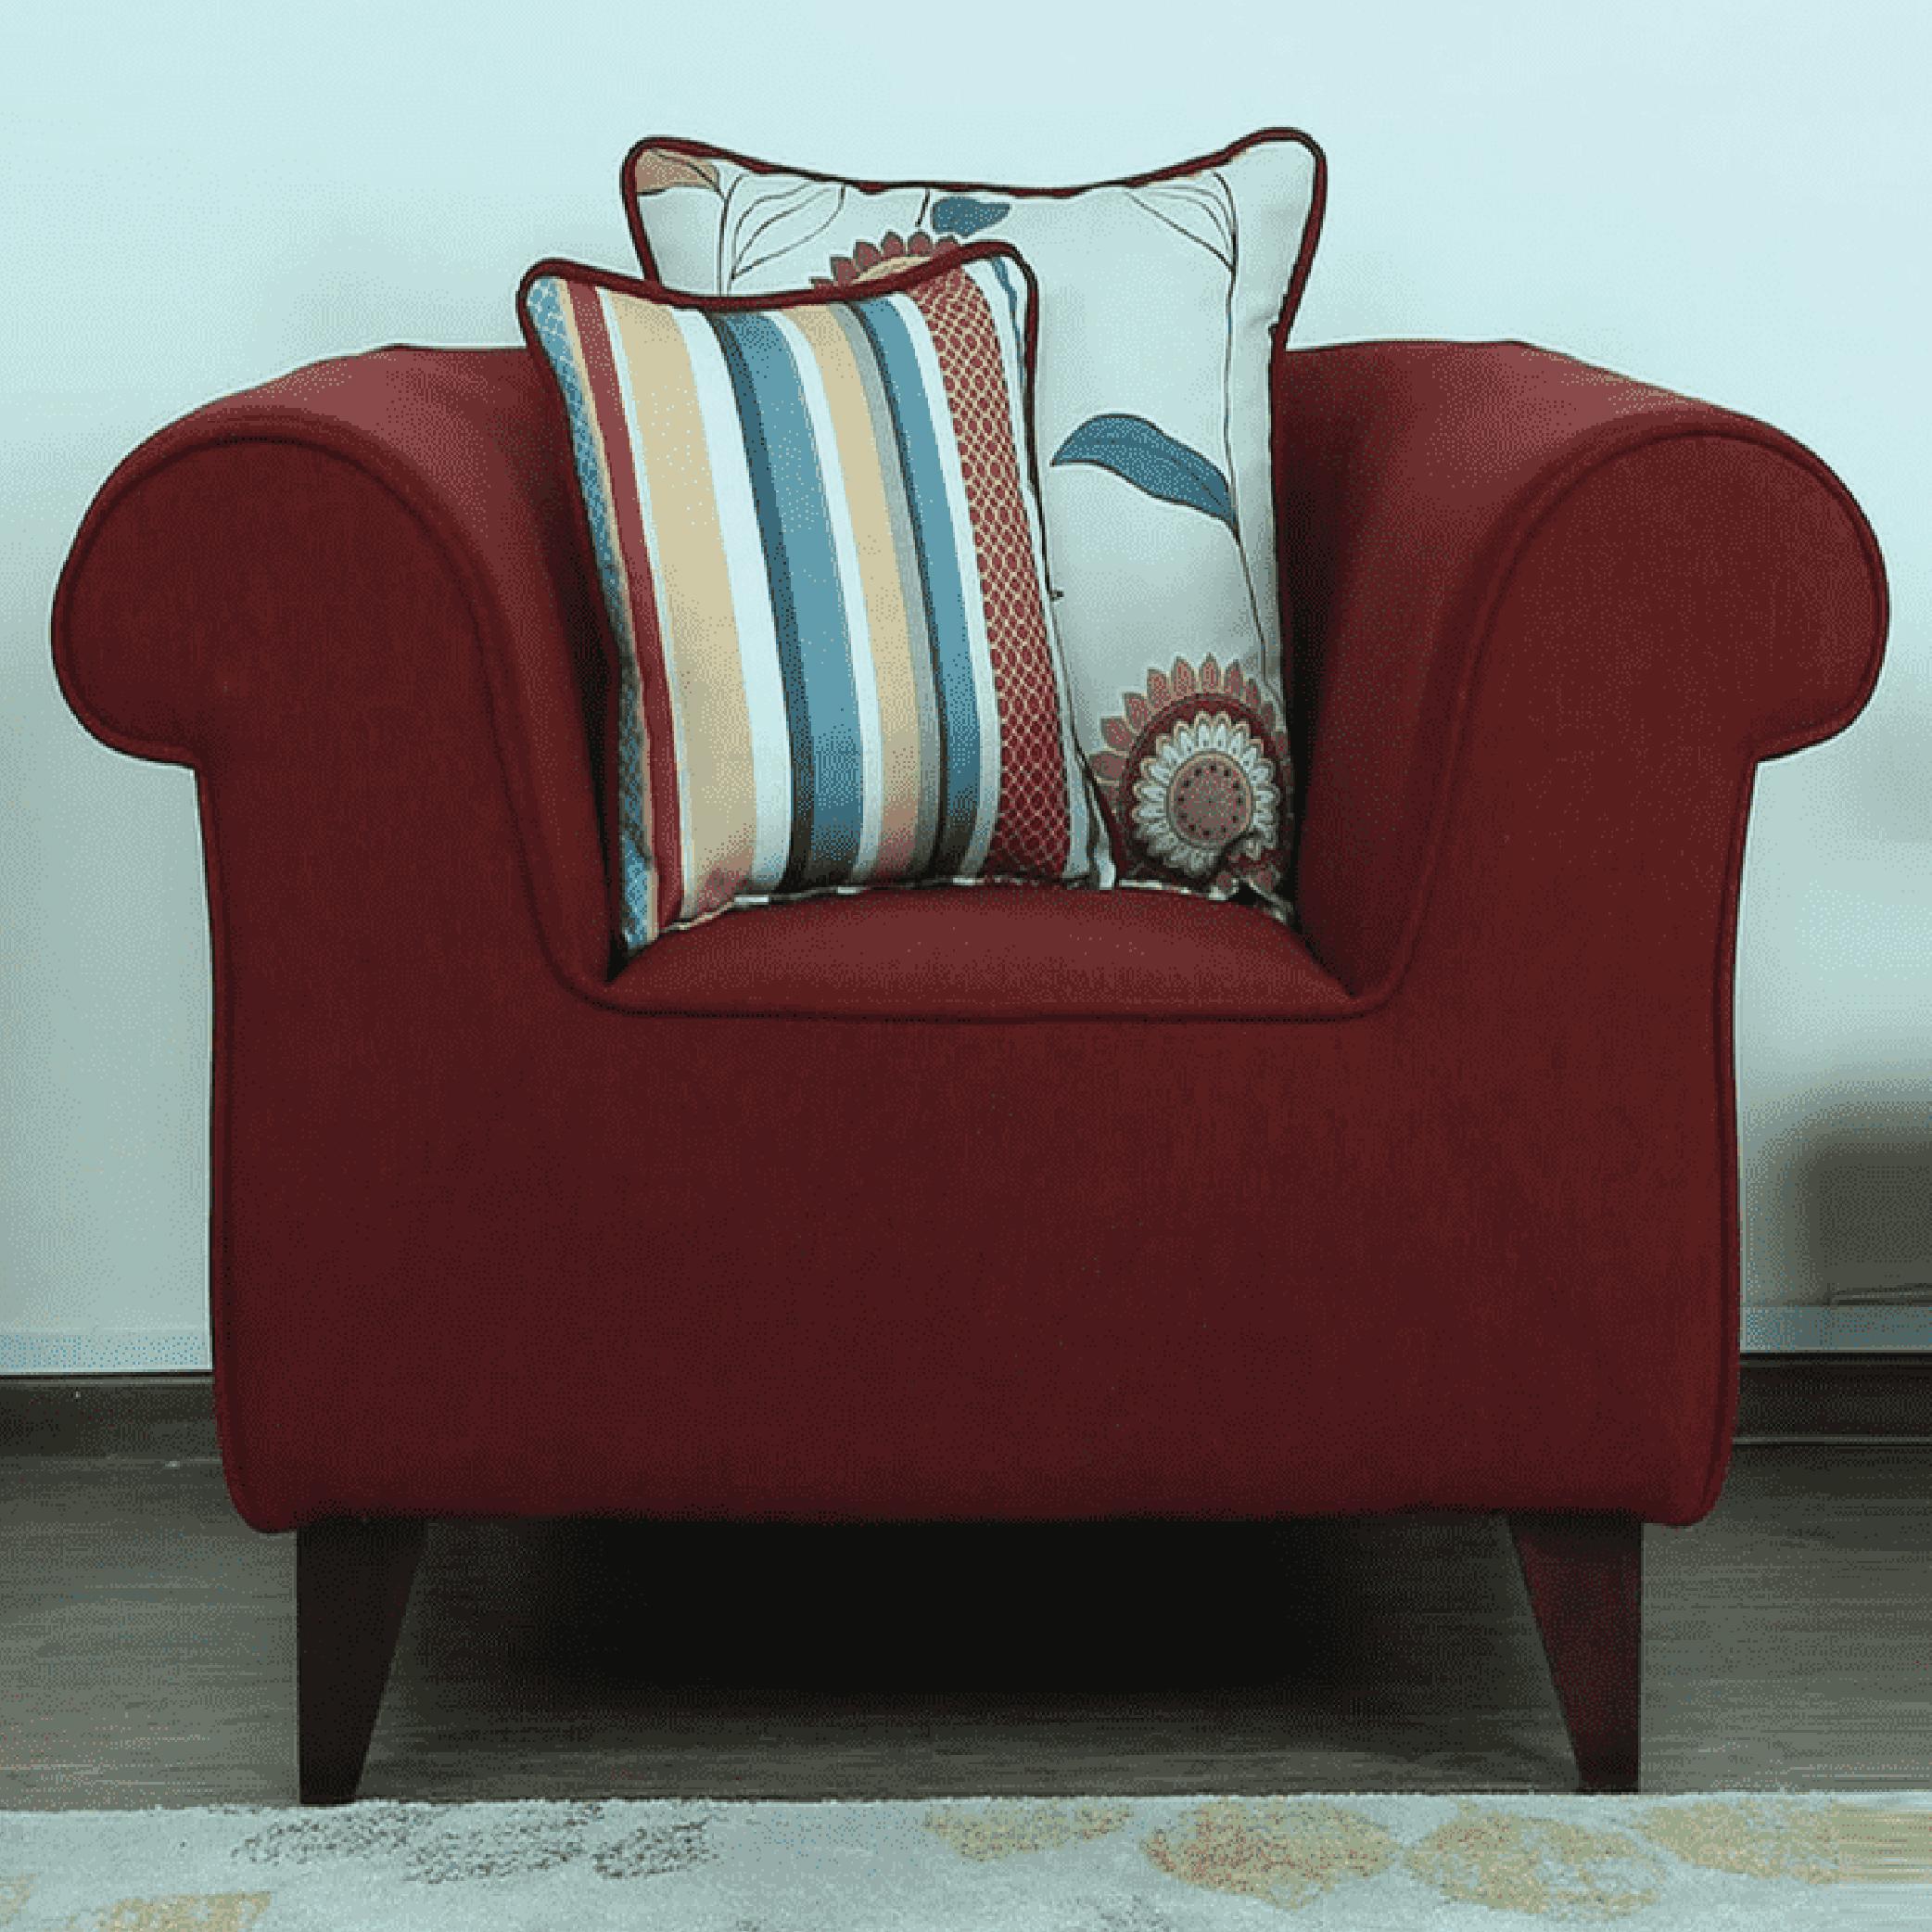 Salerno One Seater Sofa in Garnet Red Colour